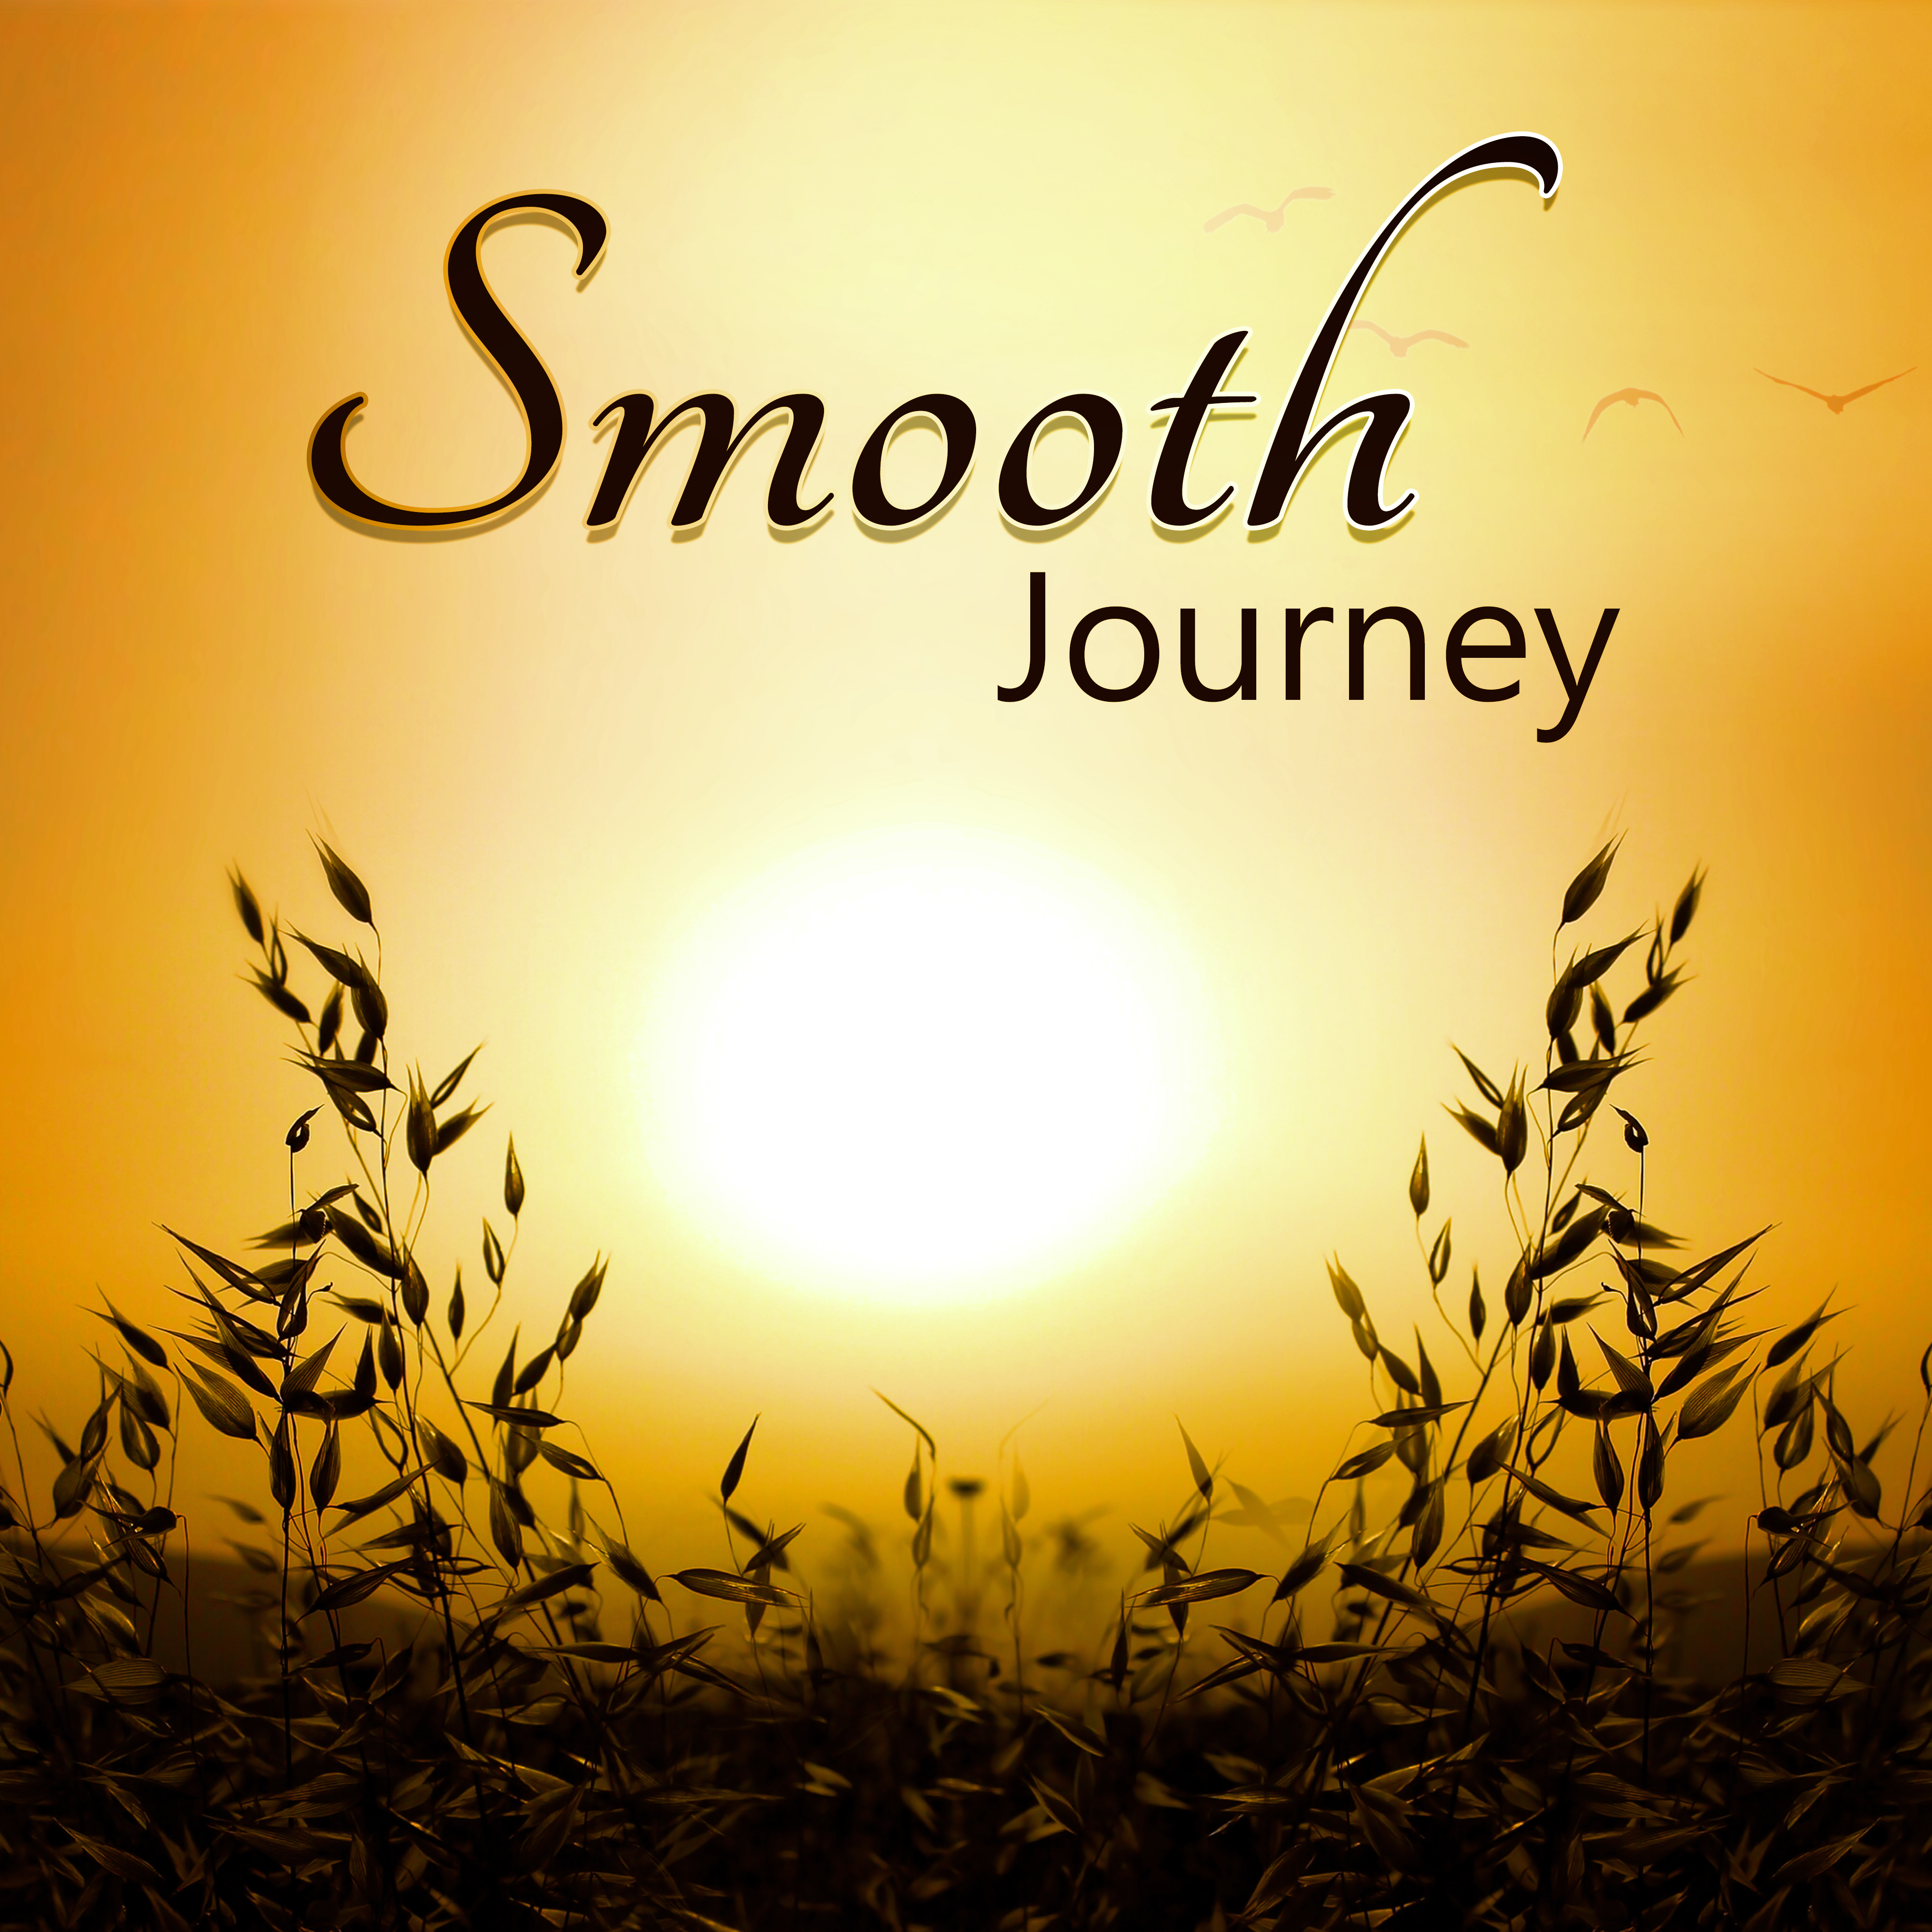 Smooth Journey - Wonderful Chill Out Music, 25 Tracks to Relax, Instrumental Music, Total Relax, Homecoming, Piano Music